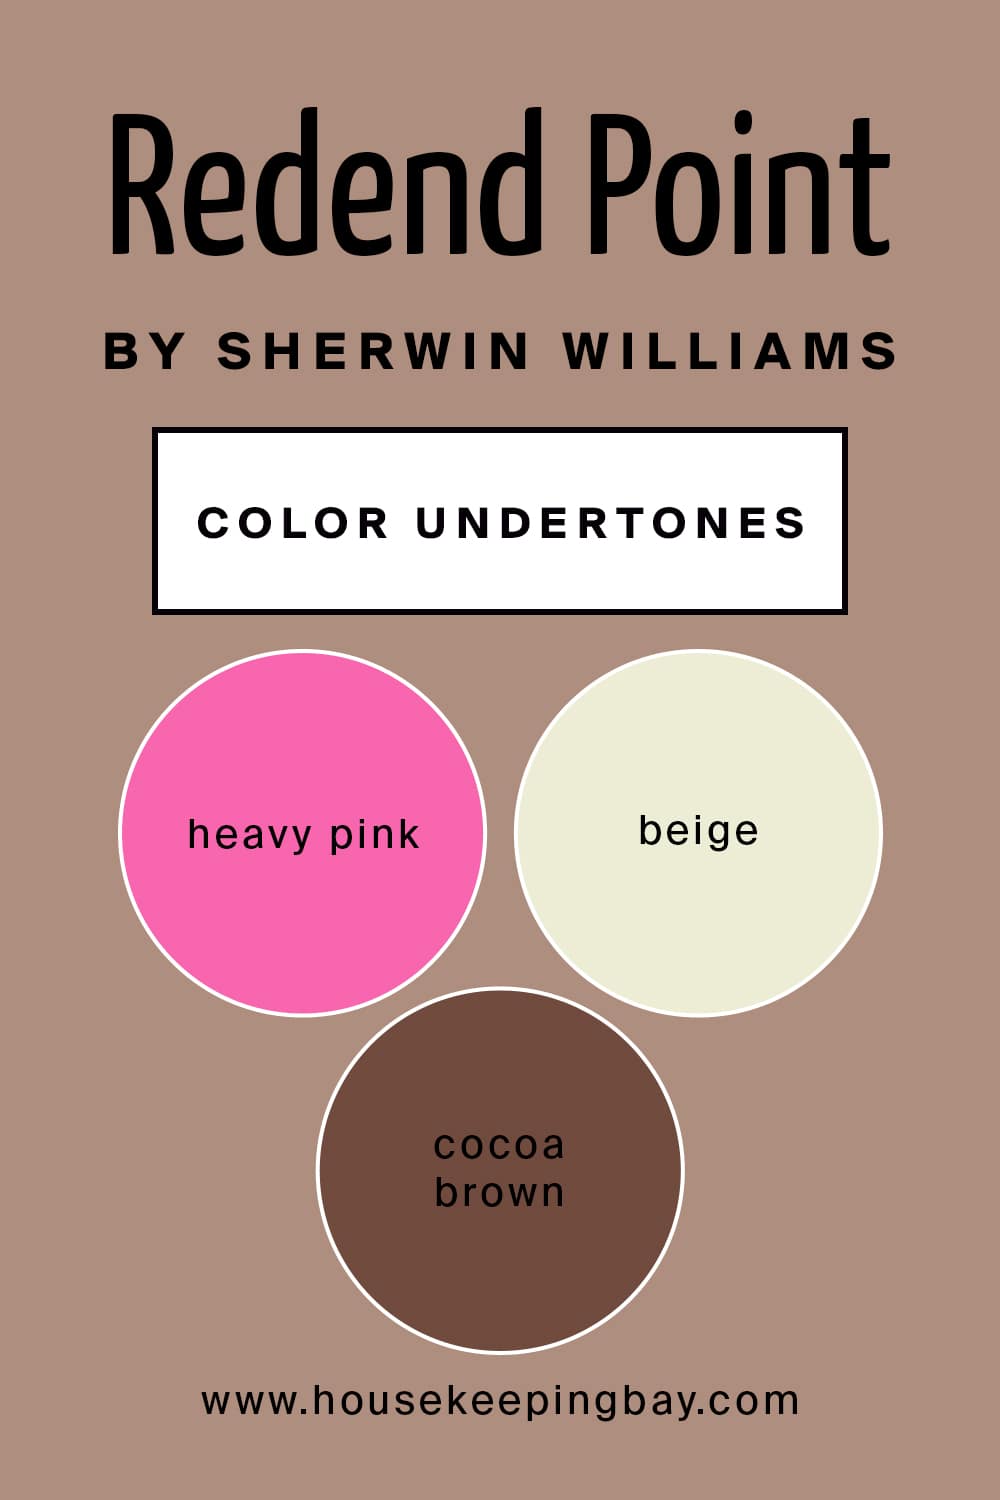 Redend Point by Sherwin Williams Color Undertones